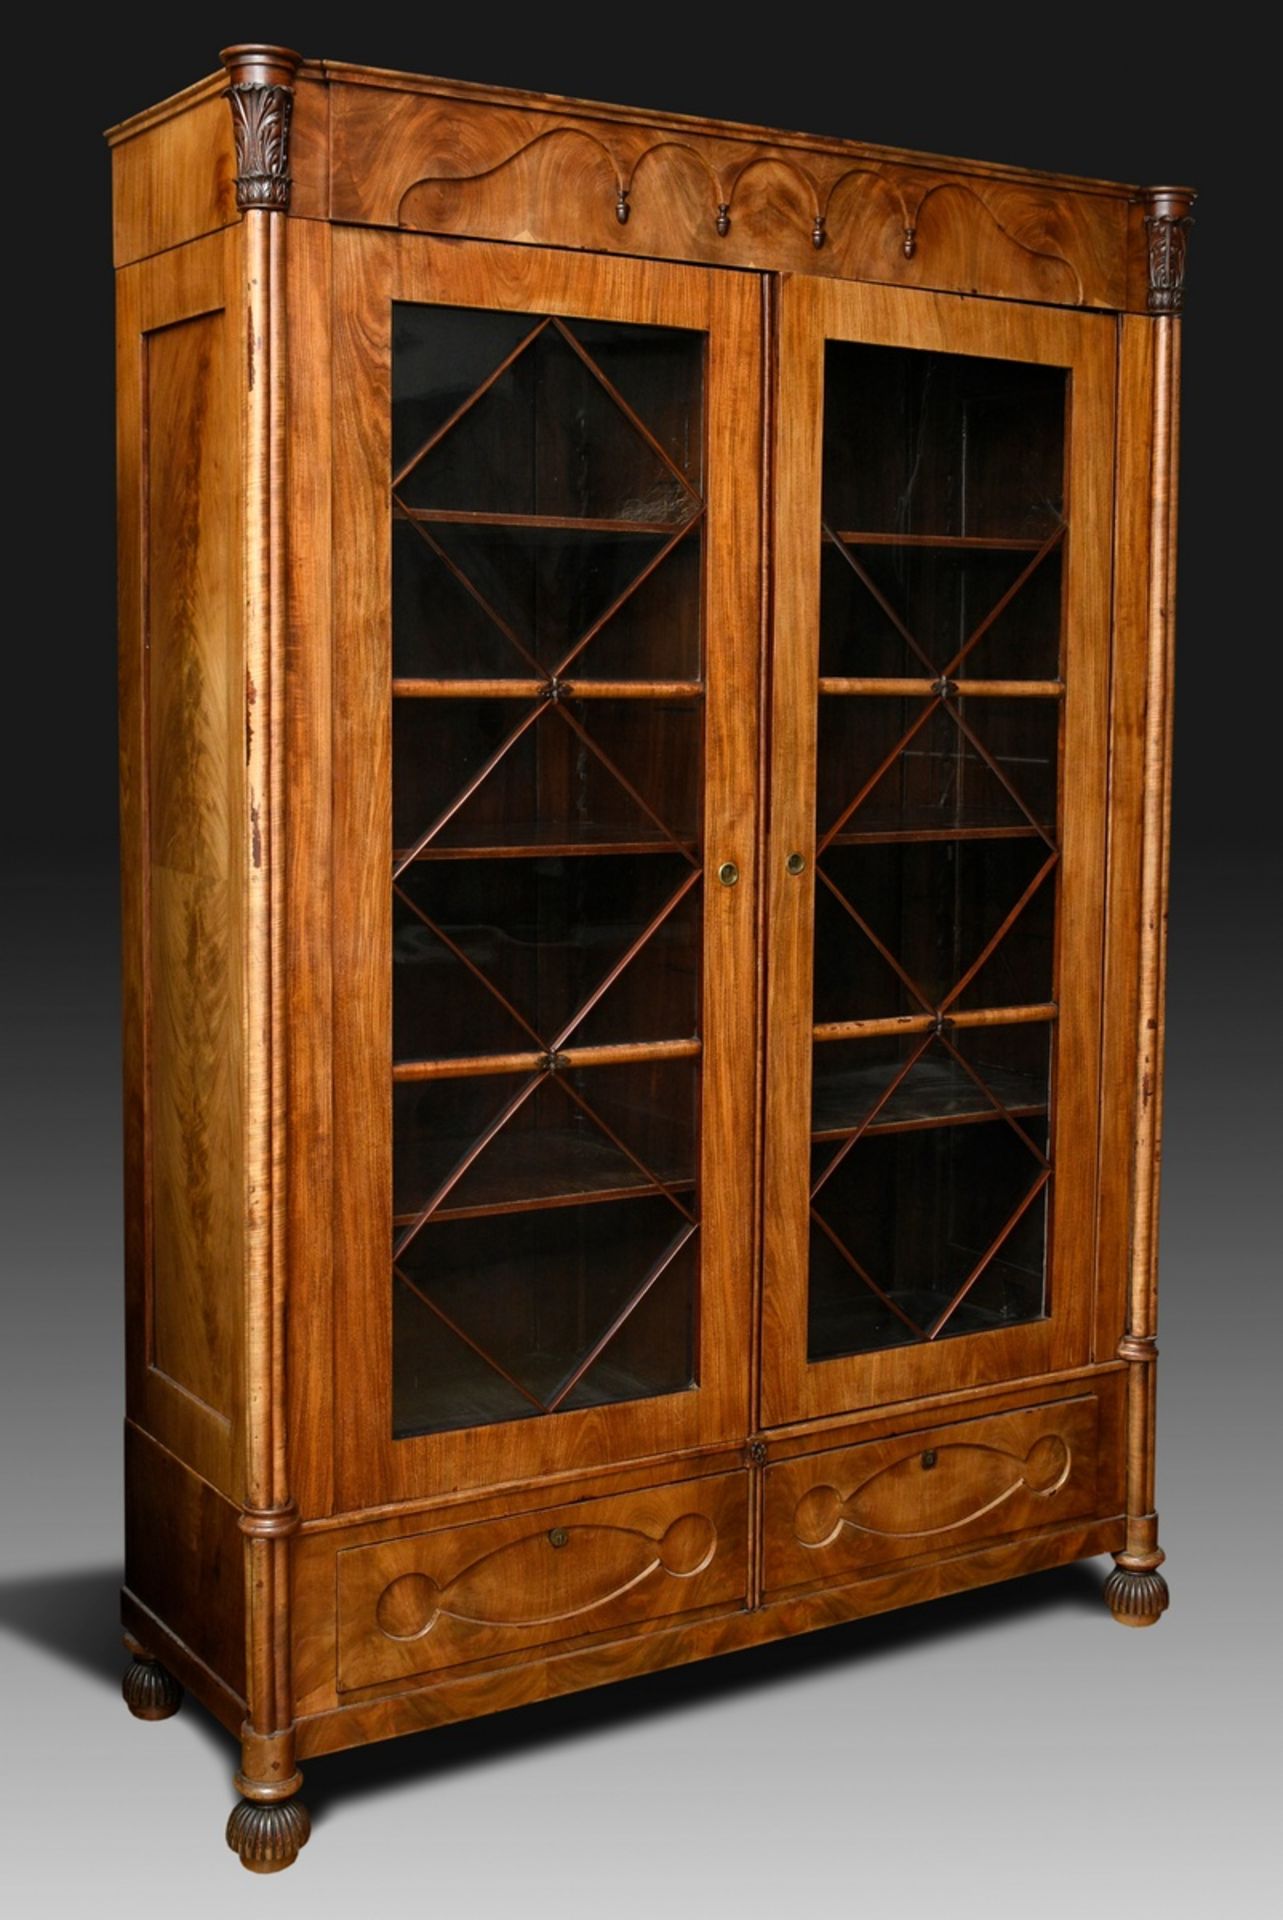 Biedermeier bookcase with gothic arches in the cornice and diamond bracing on the glazed doors betw